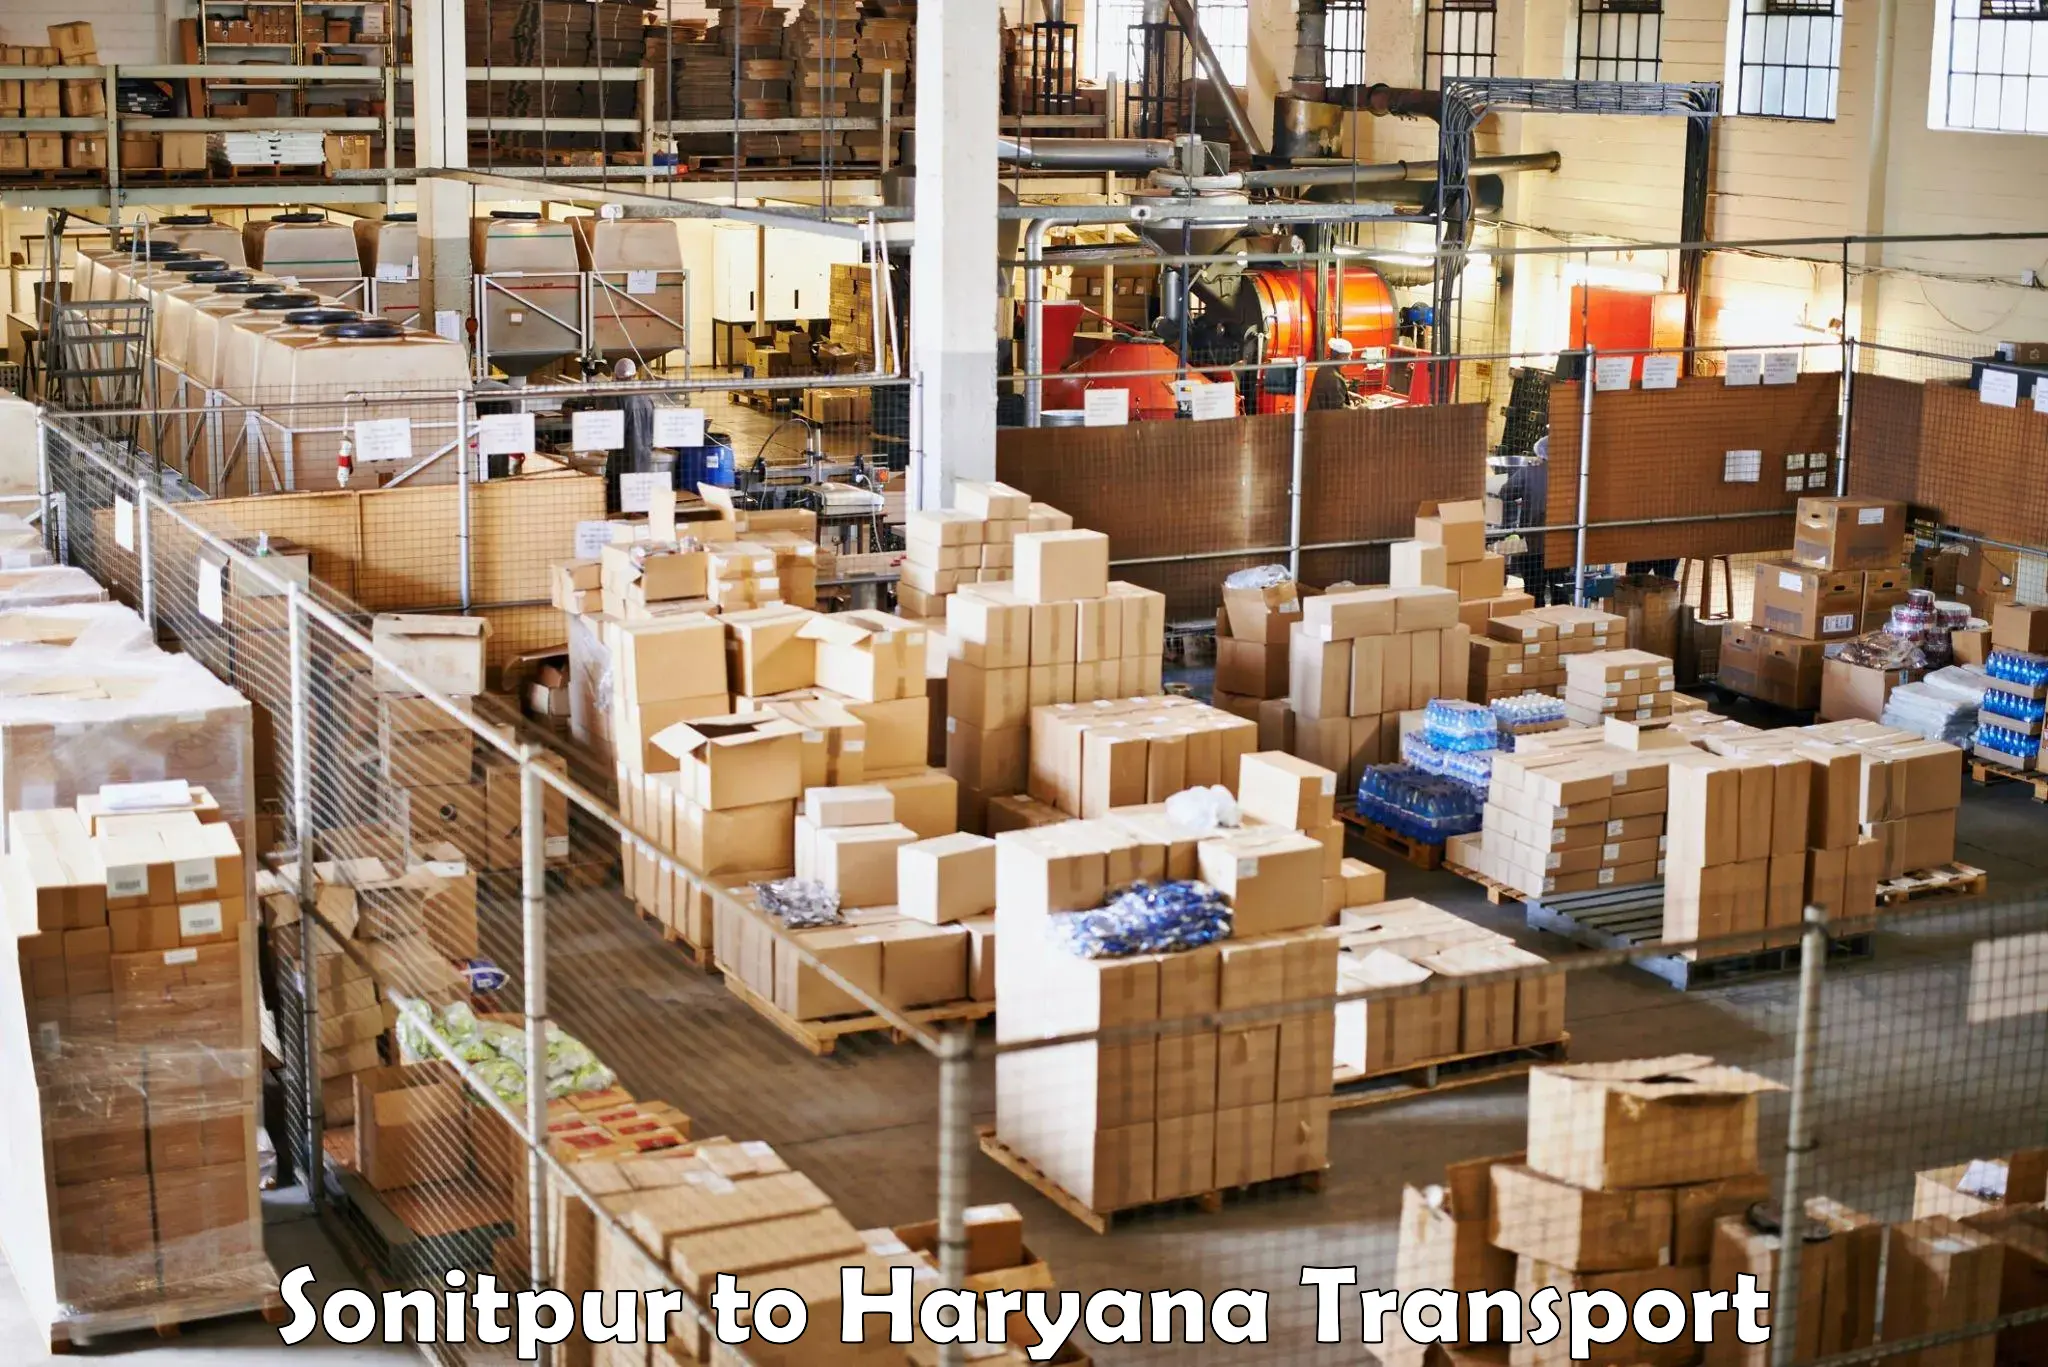 Commercial transport service Sonitpur to Haryana